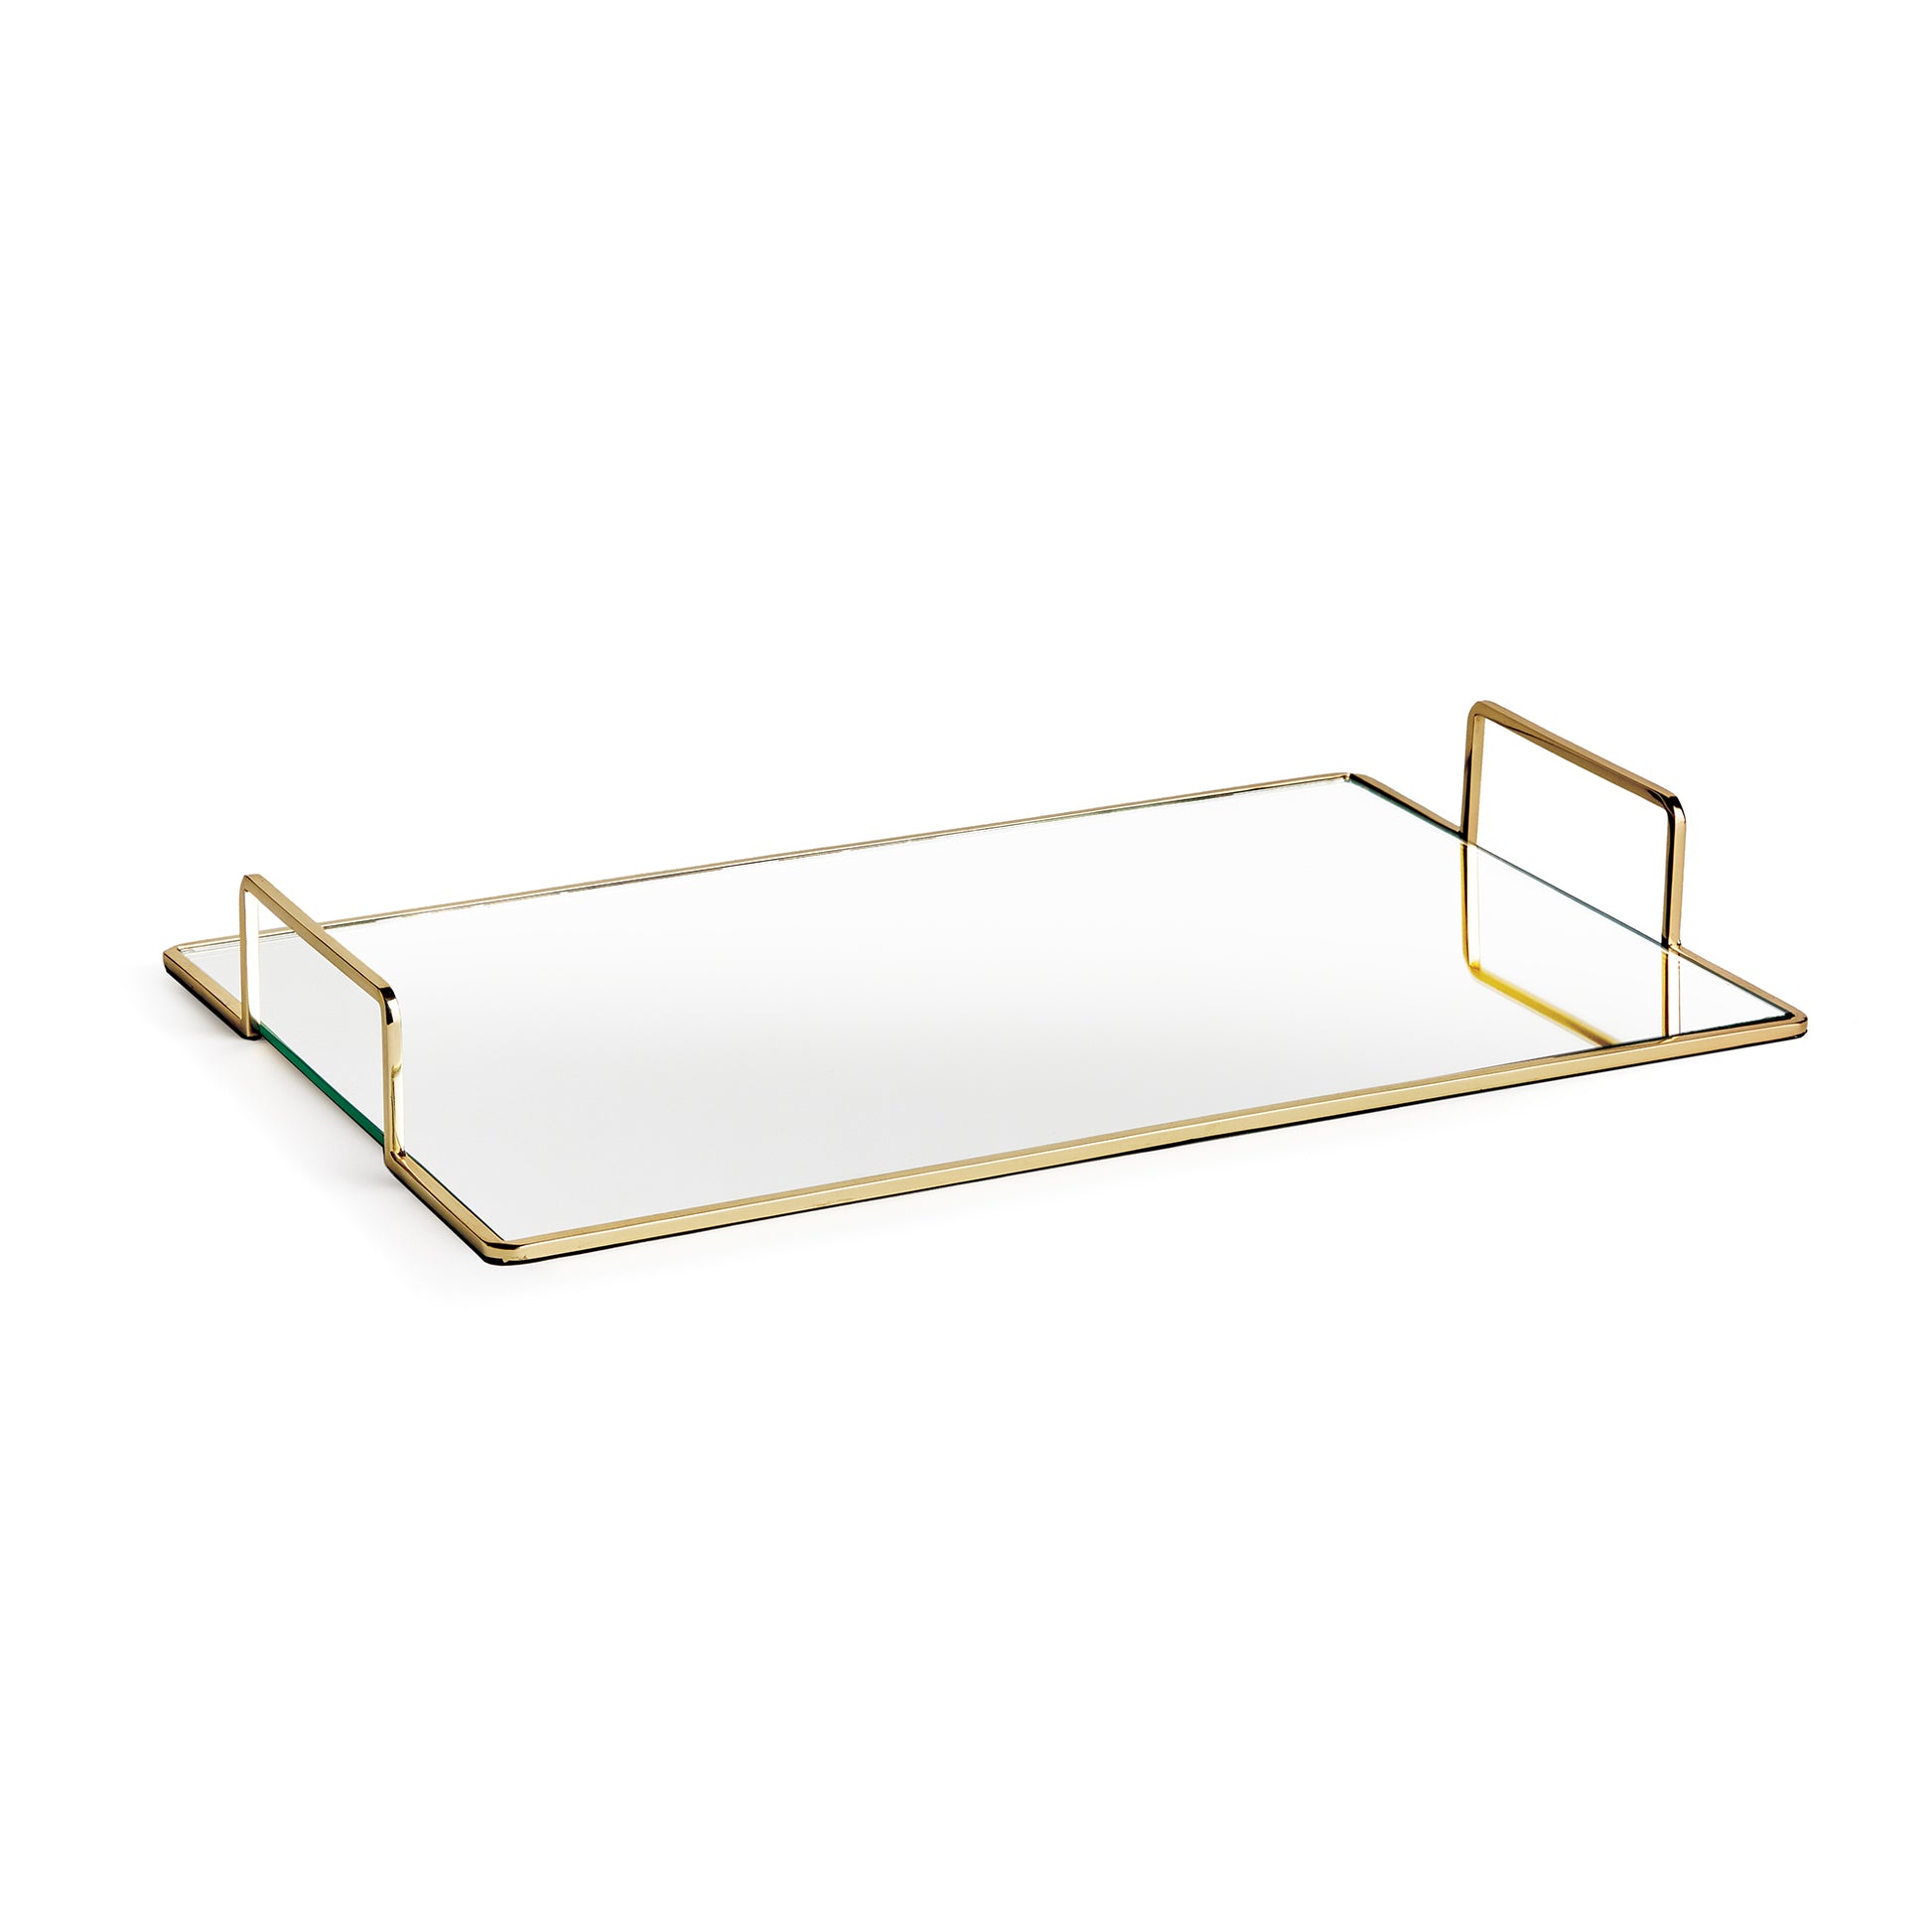 Smooth and streamlined, this mirrored tray is a clean and modern accent. Add to ottoman, side table or even the kitchen counter for a sleek look.